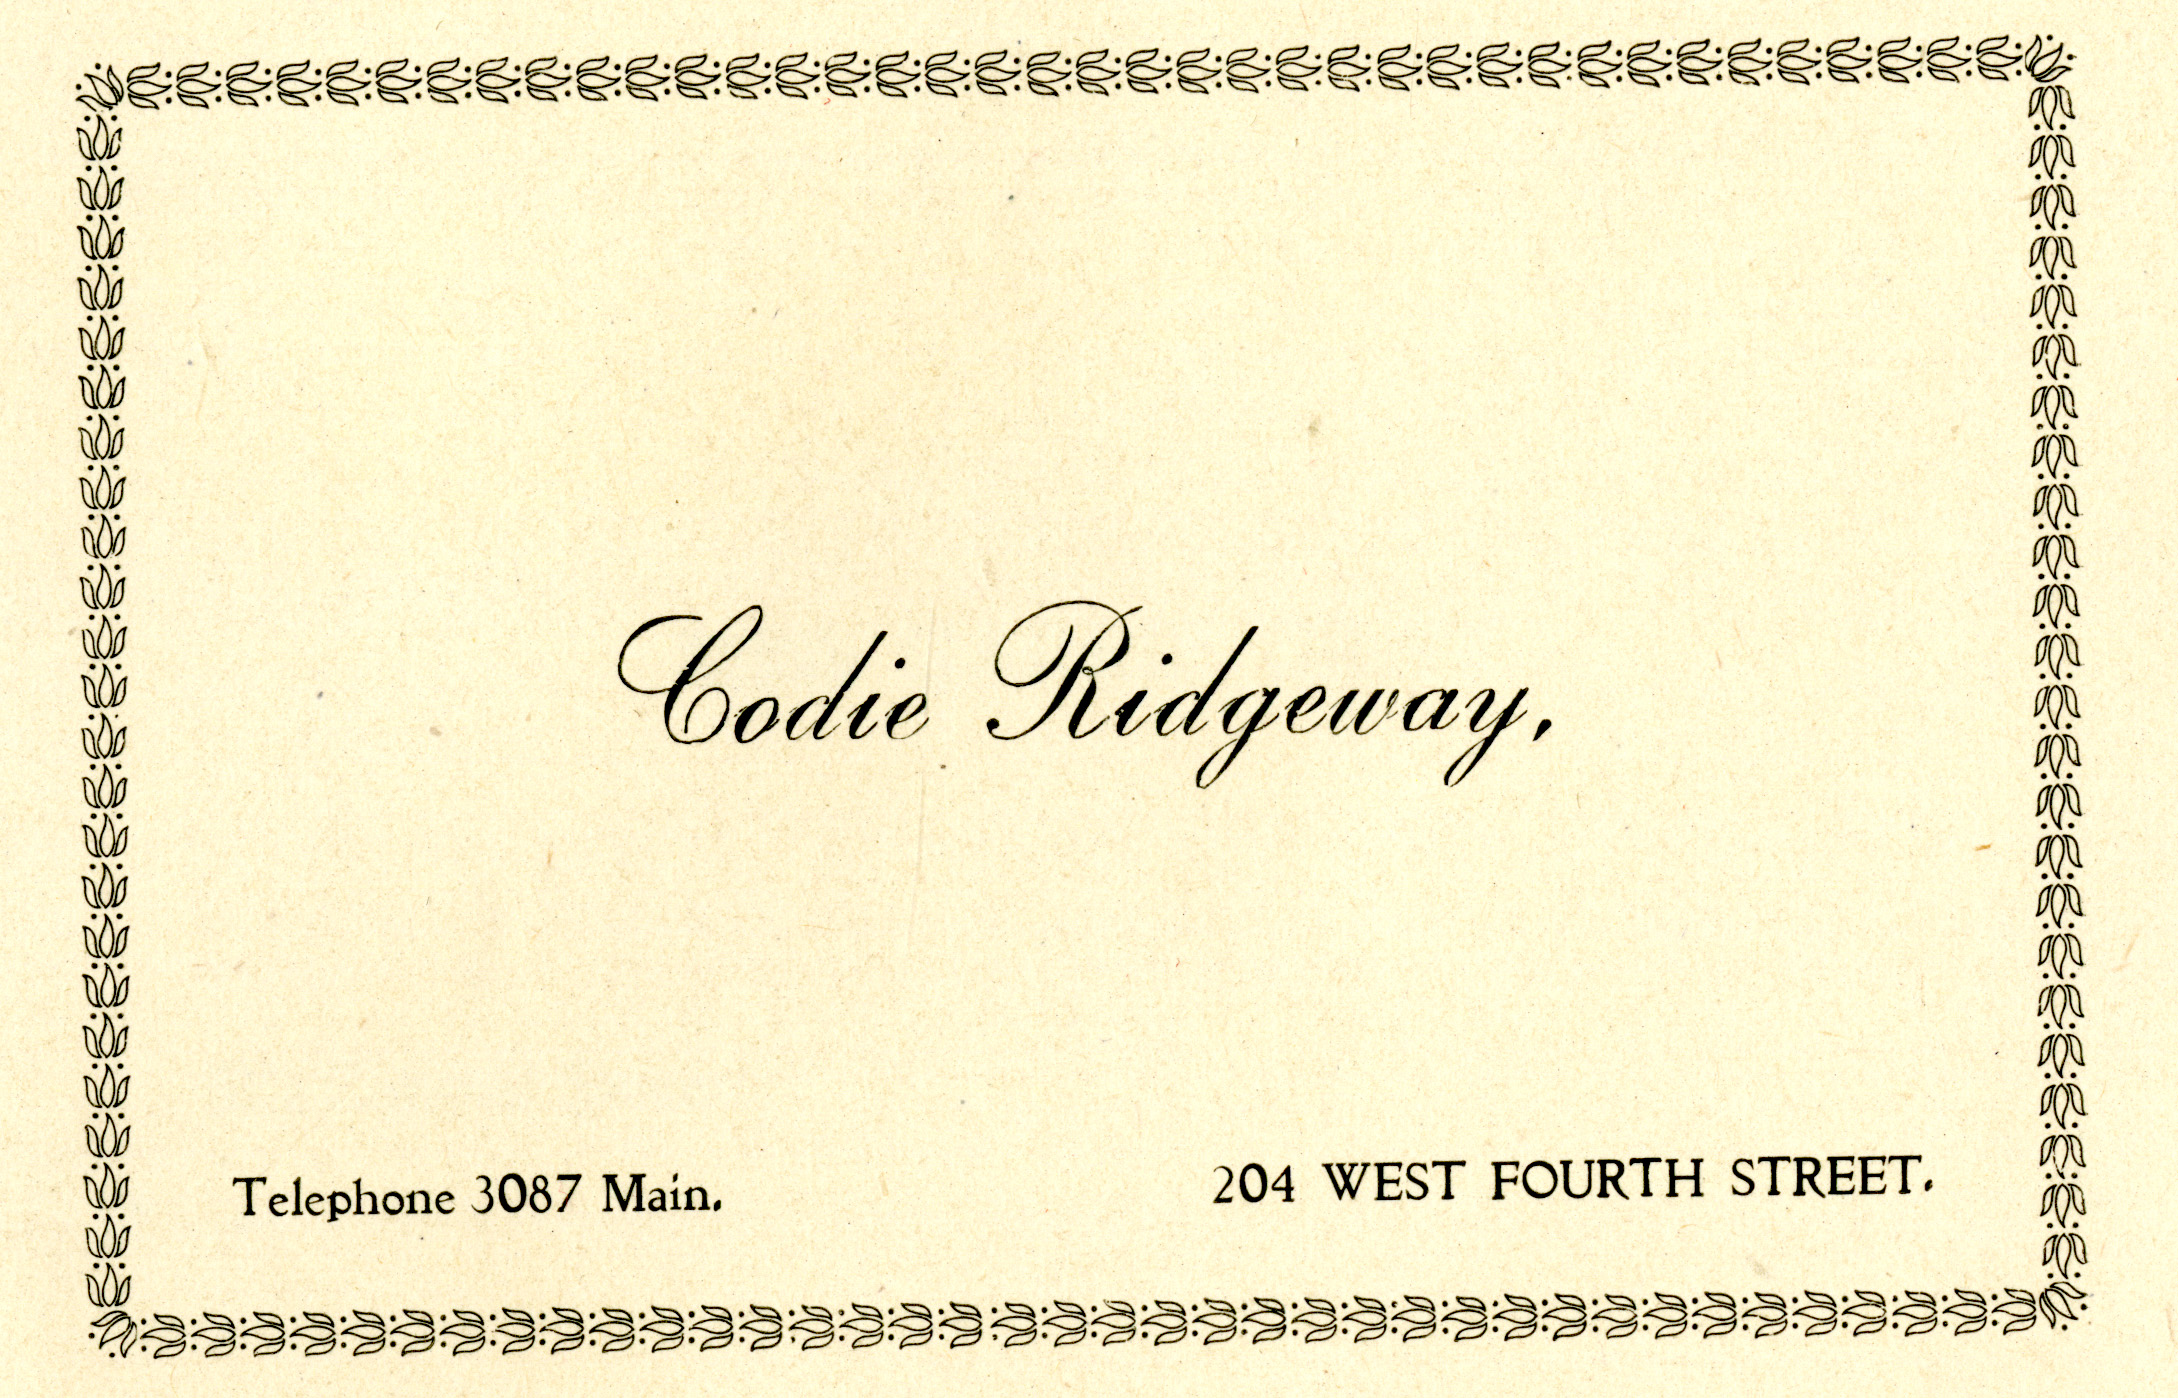 City Directory Contact Information for Codie Ridgeway